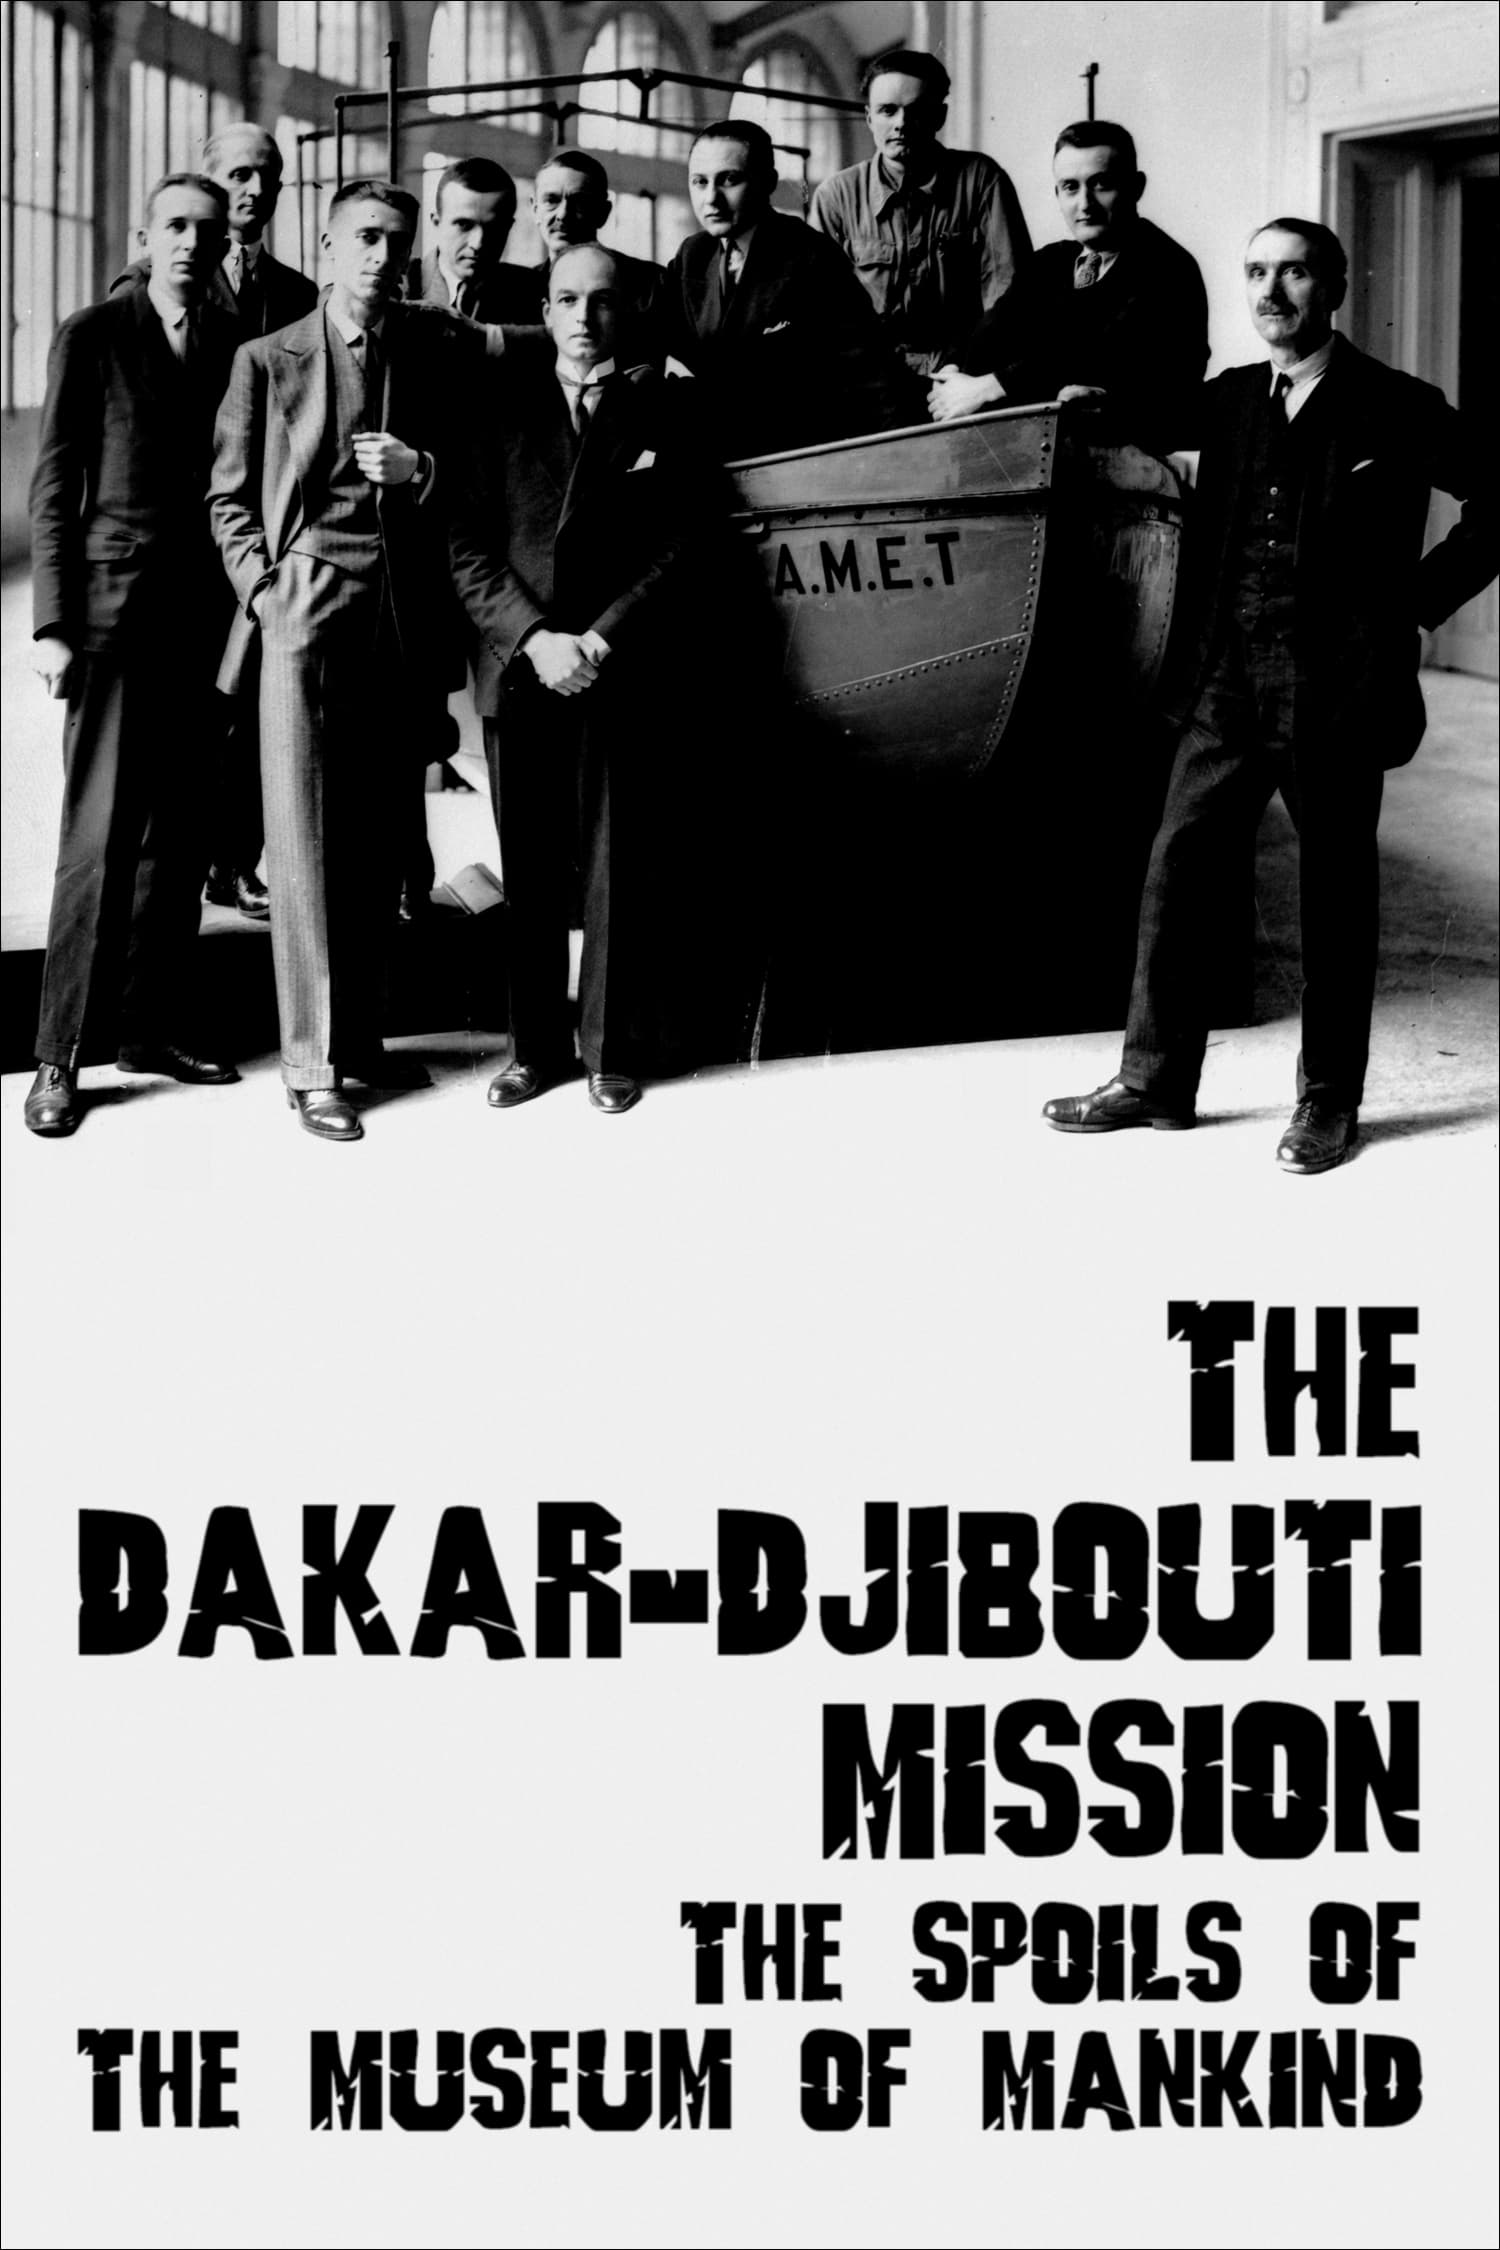 The Dakar-Djibouti Mission: The Spoils of the Museum of Mankind